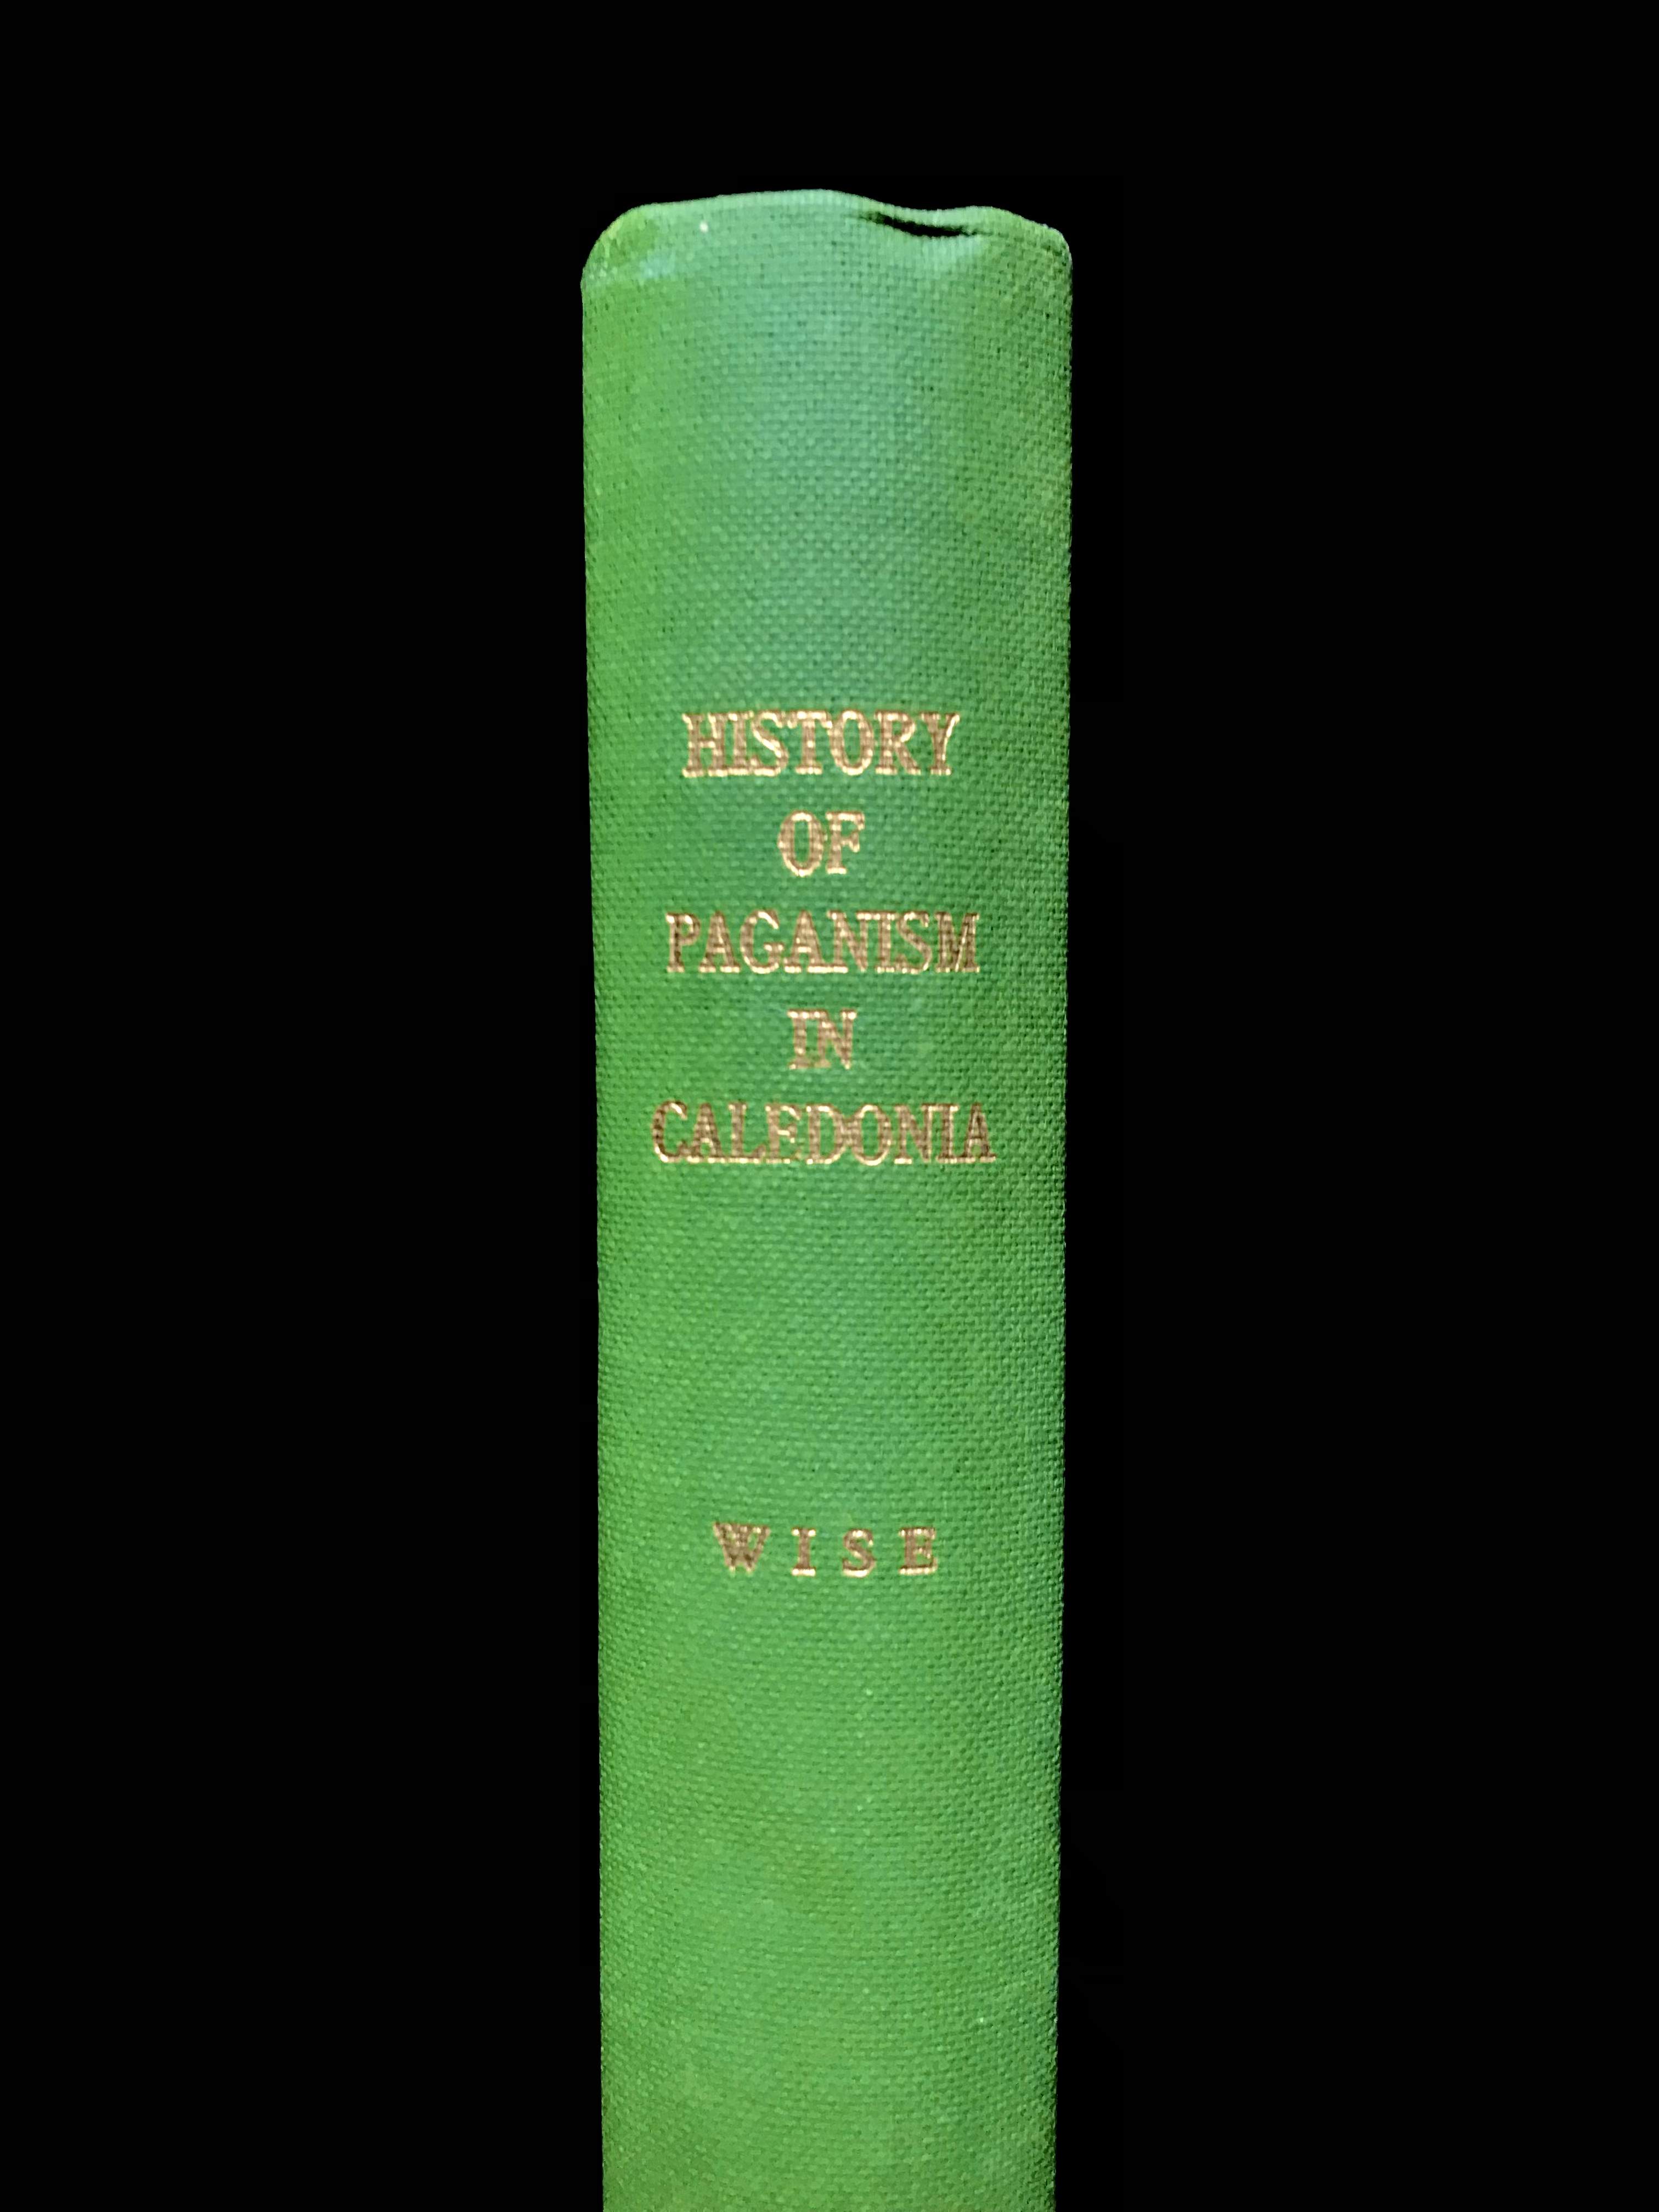 History of Paganism in Caledonia by Thomas A. Wise